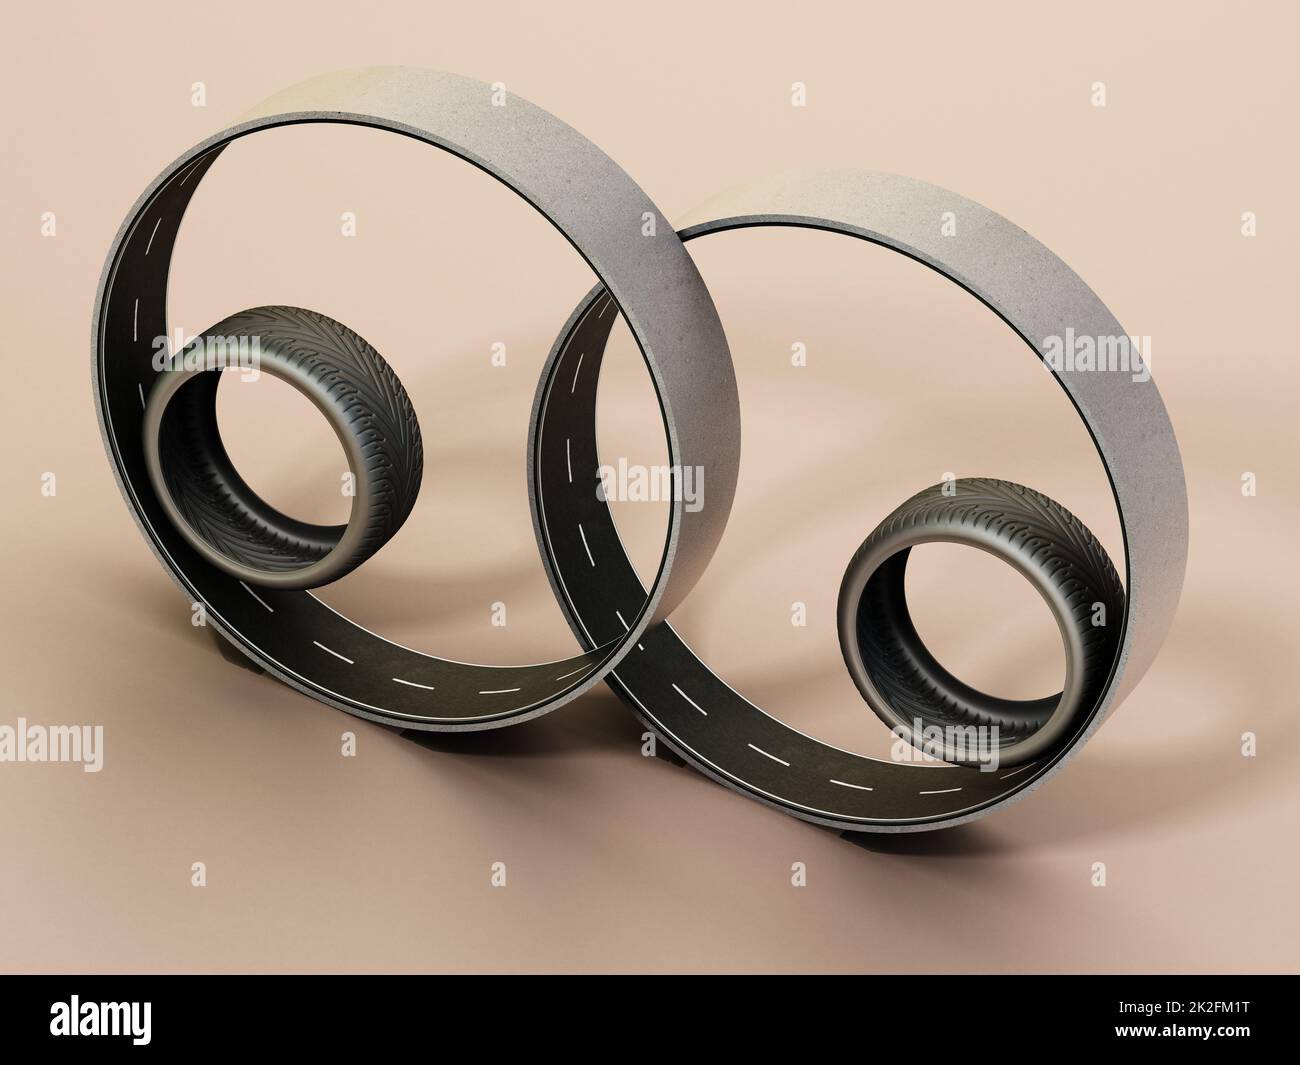 Spare new racing tyres inside circle shaped roads. 3D illustration Stock Photo